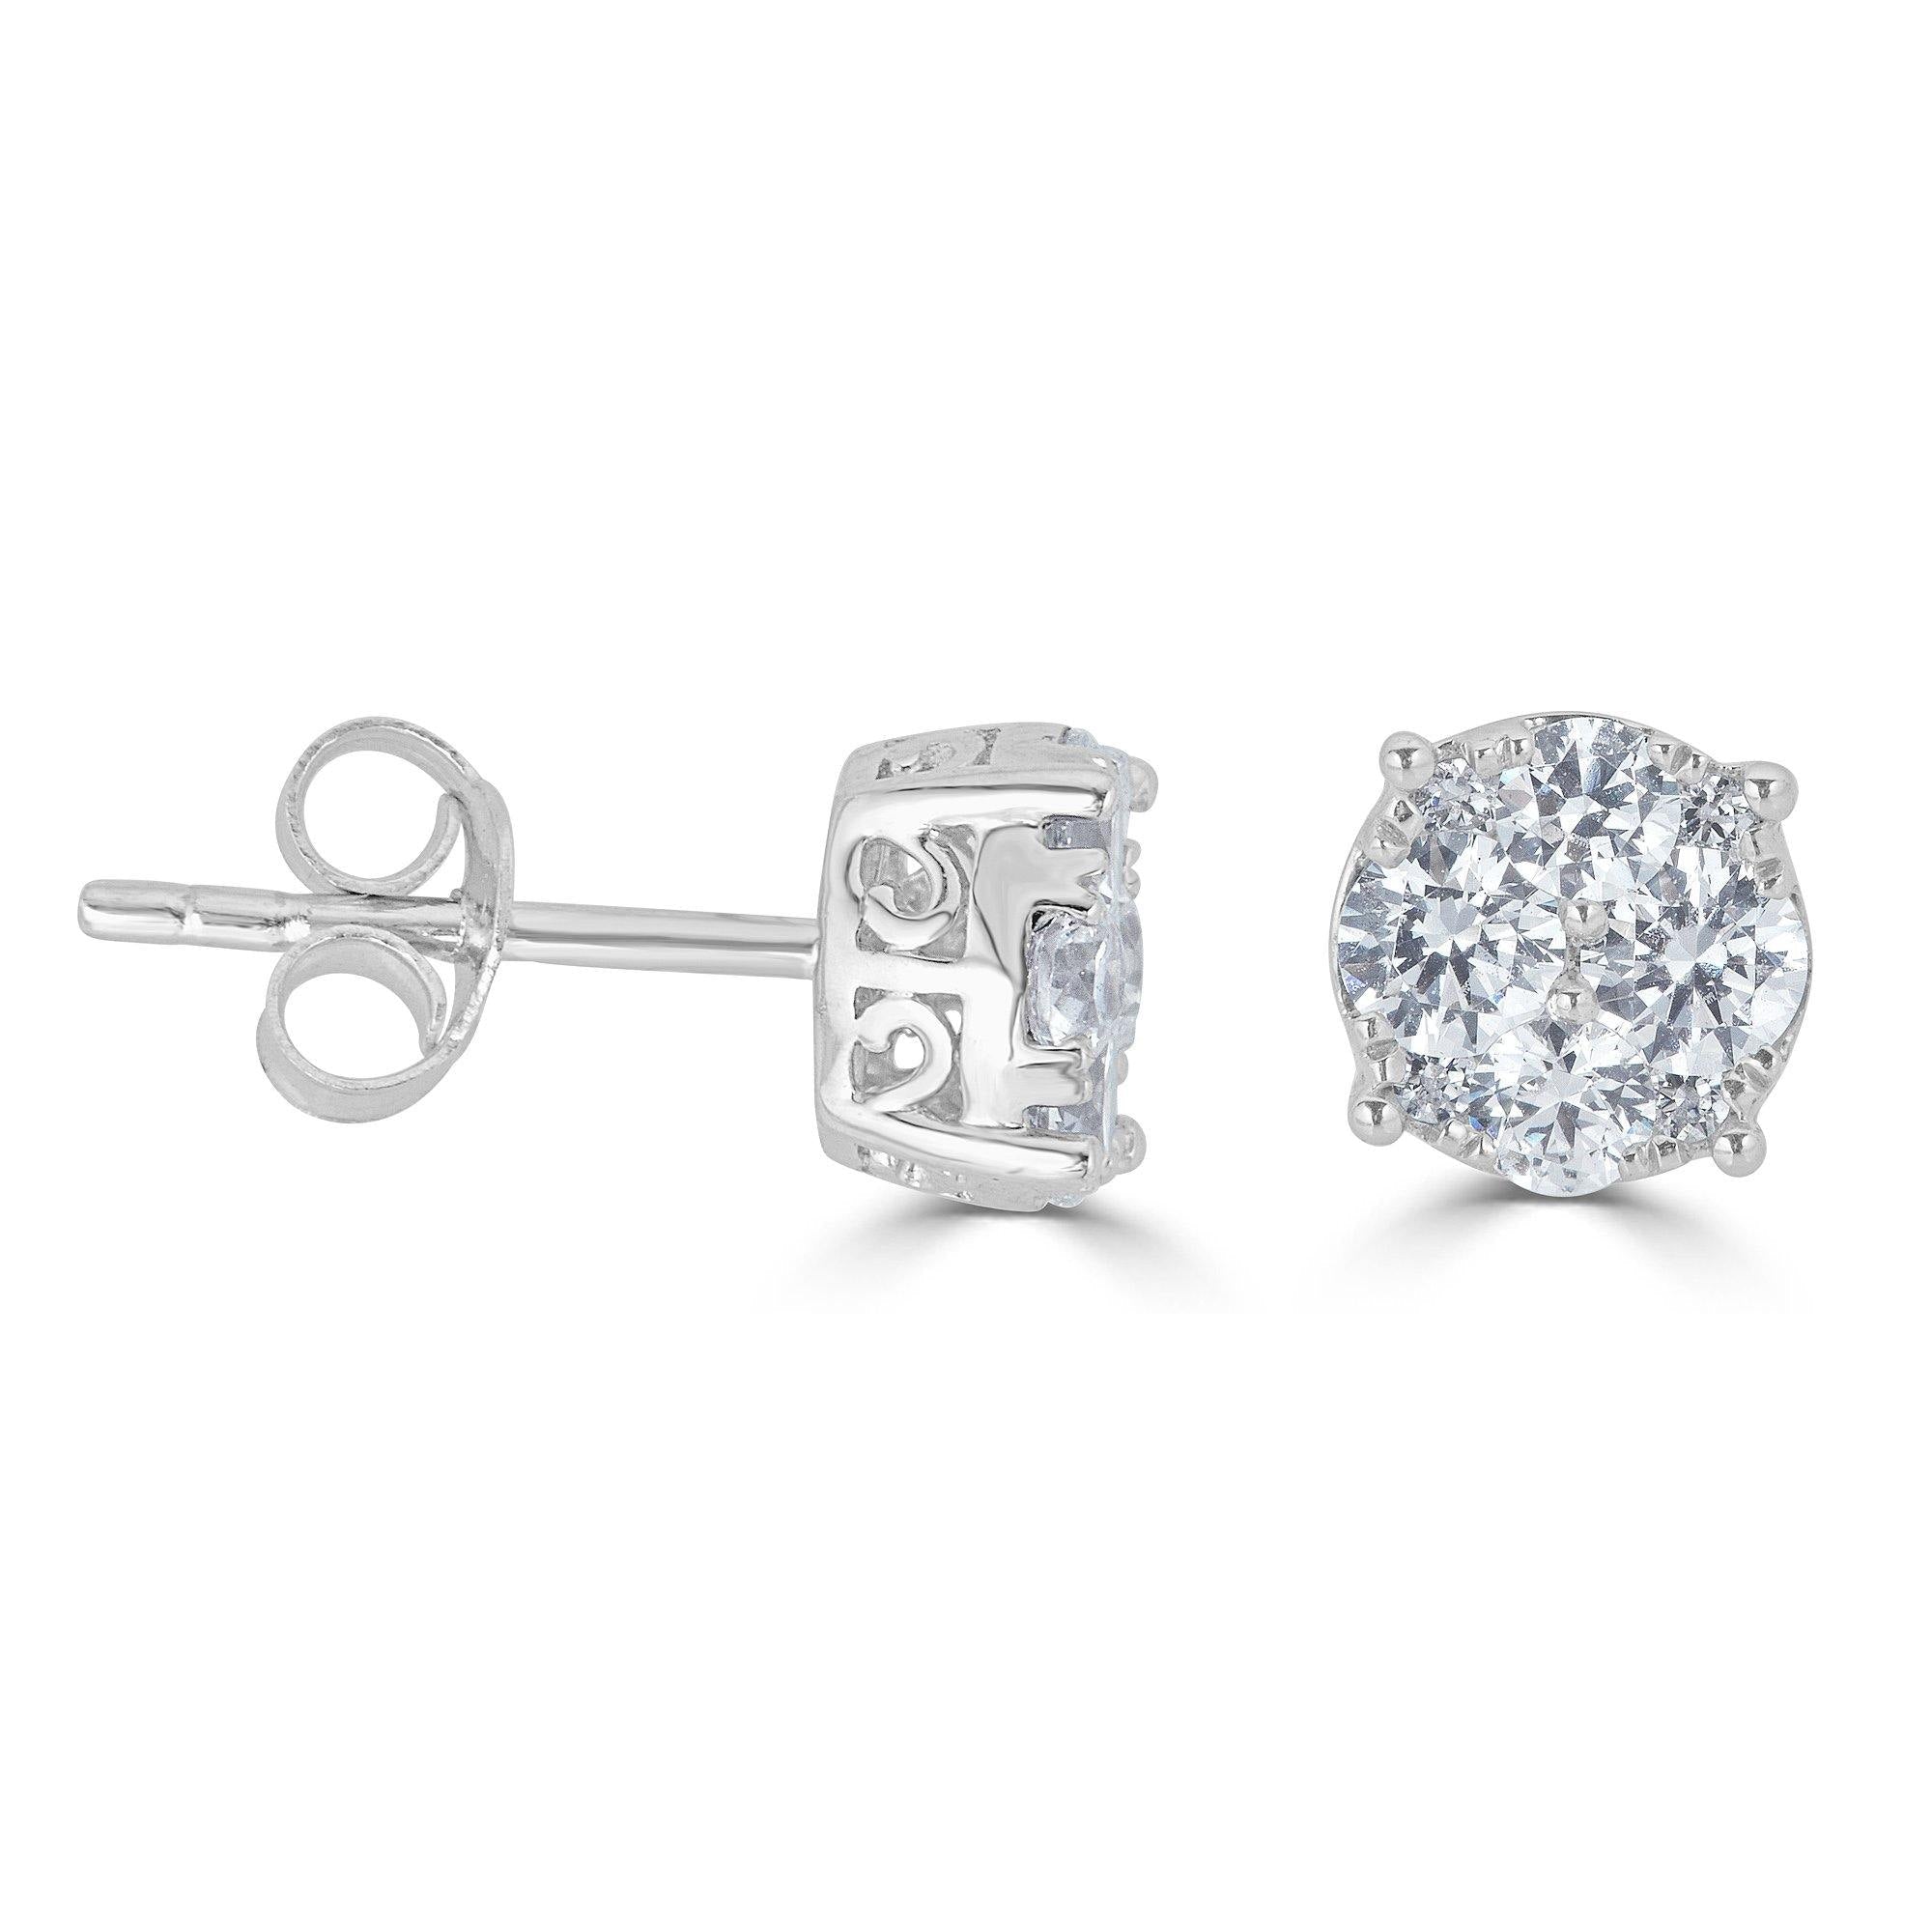 Stud American Diamond Earrings: Sparkle With Affordable Glamour - Tito's  Fashion House